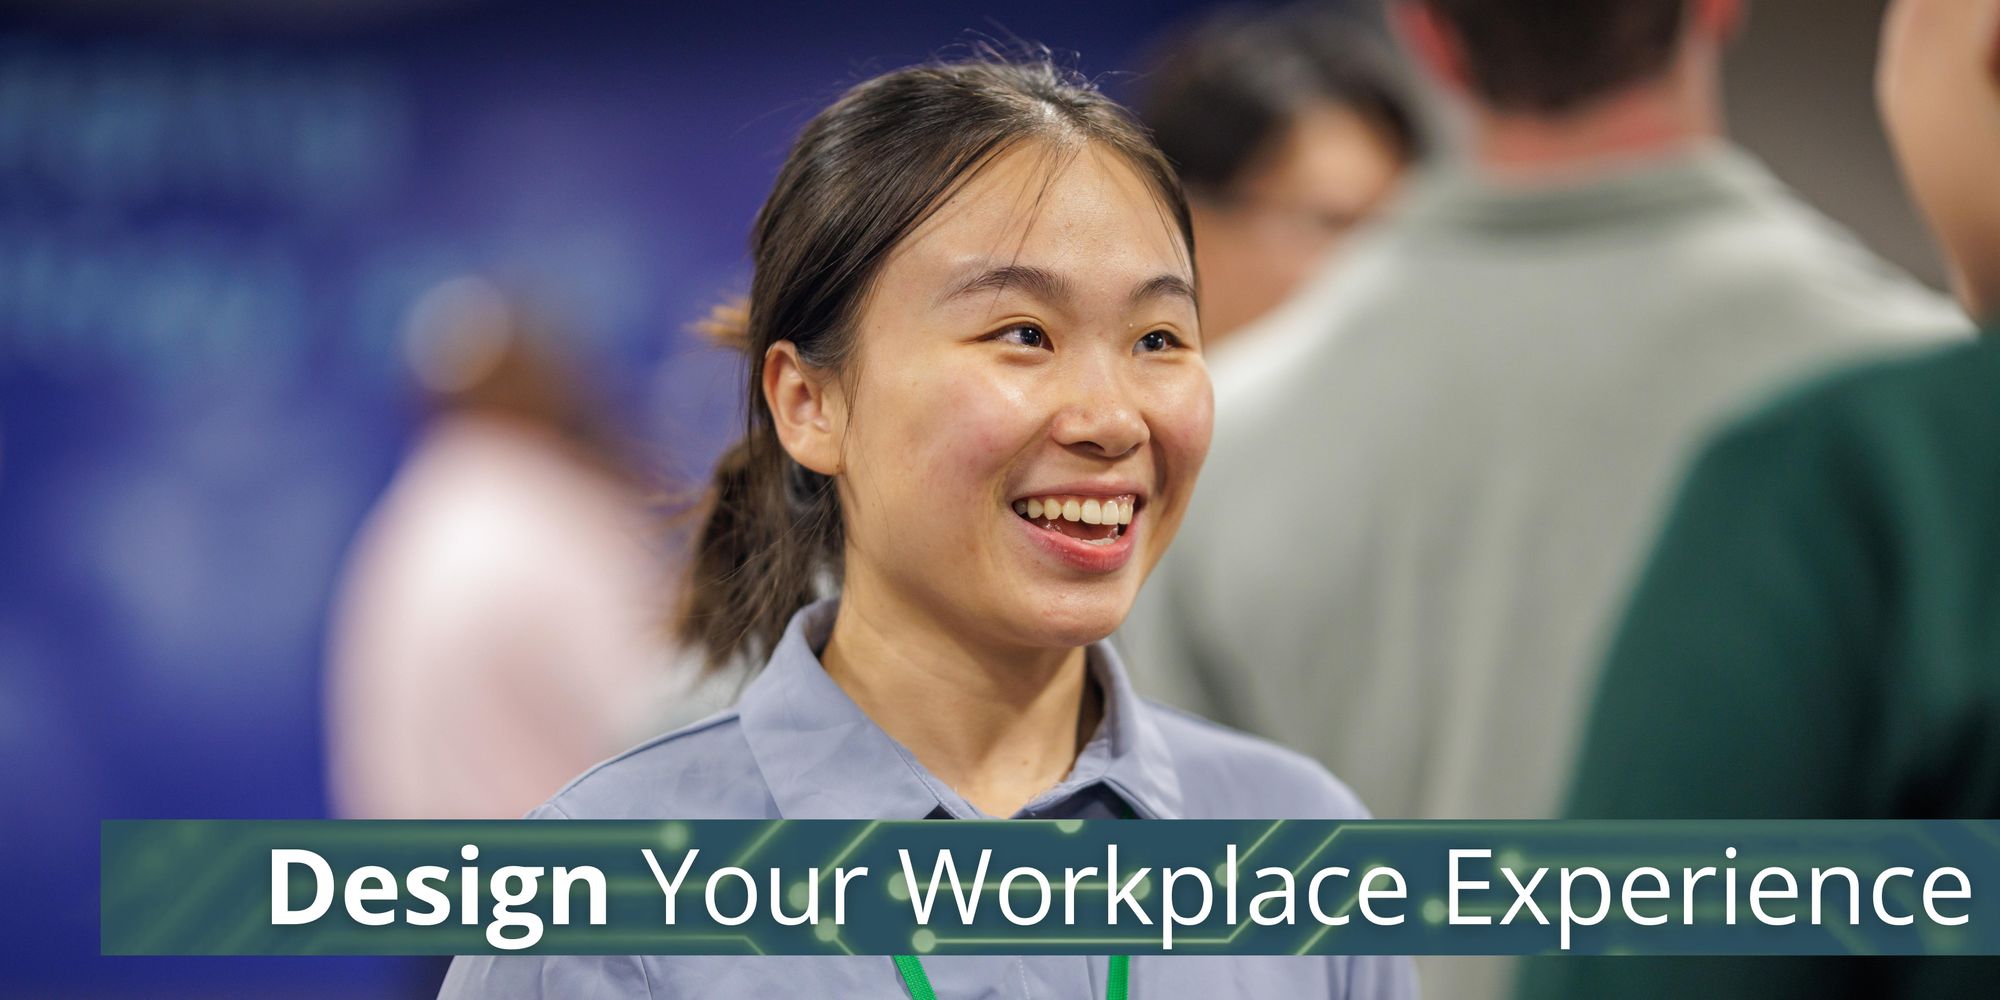 Design Your Work Place Experience: The Impact of a Flexible Work Environment